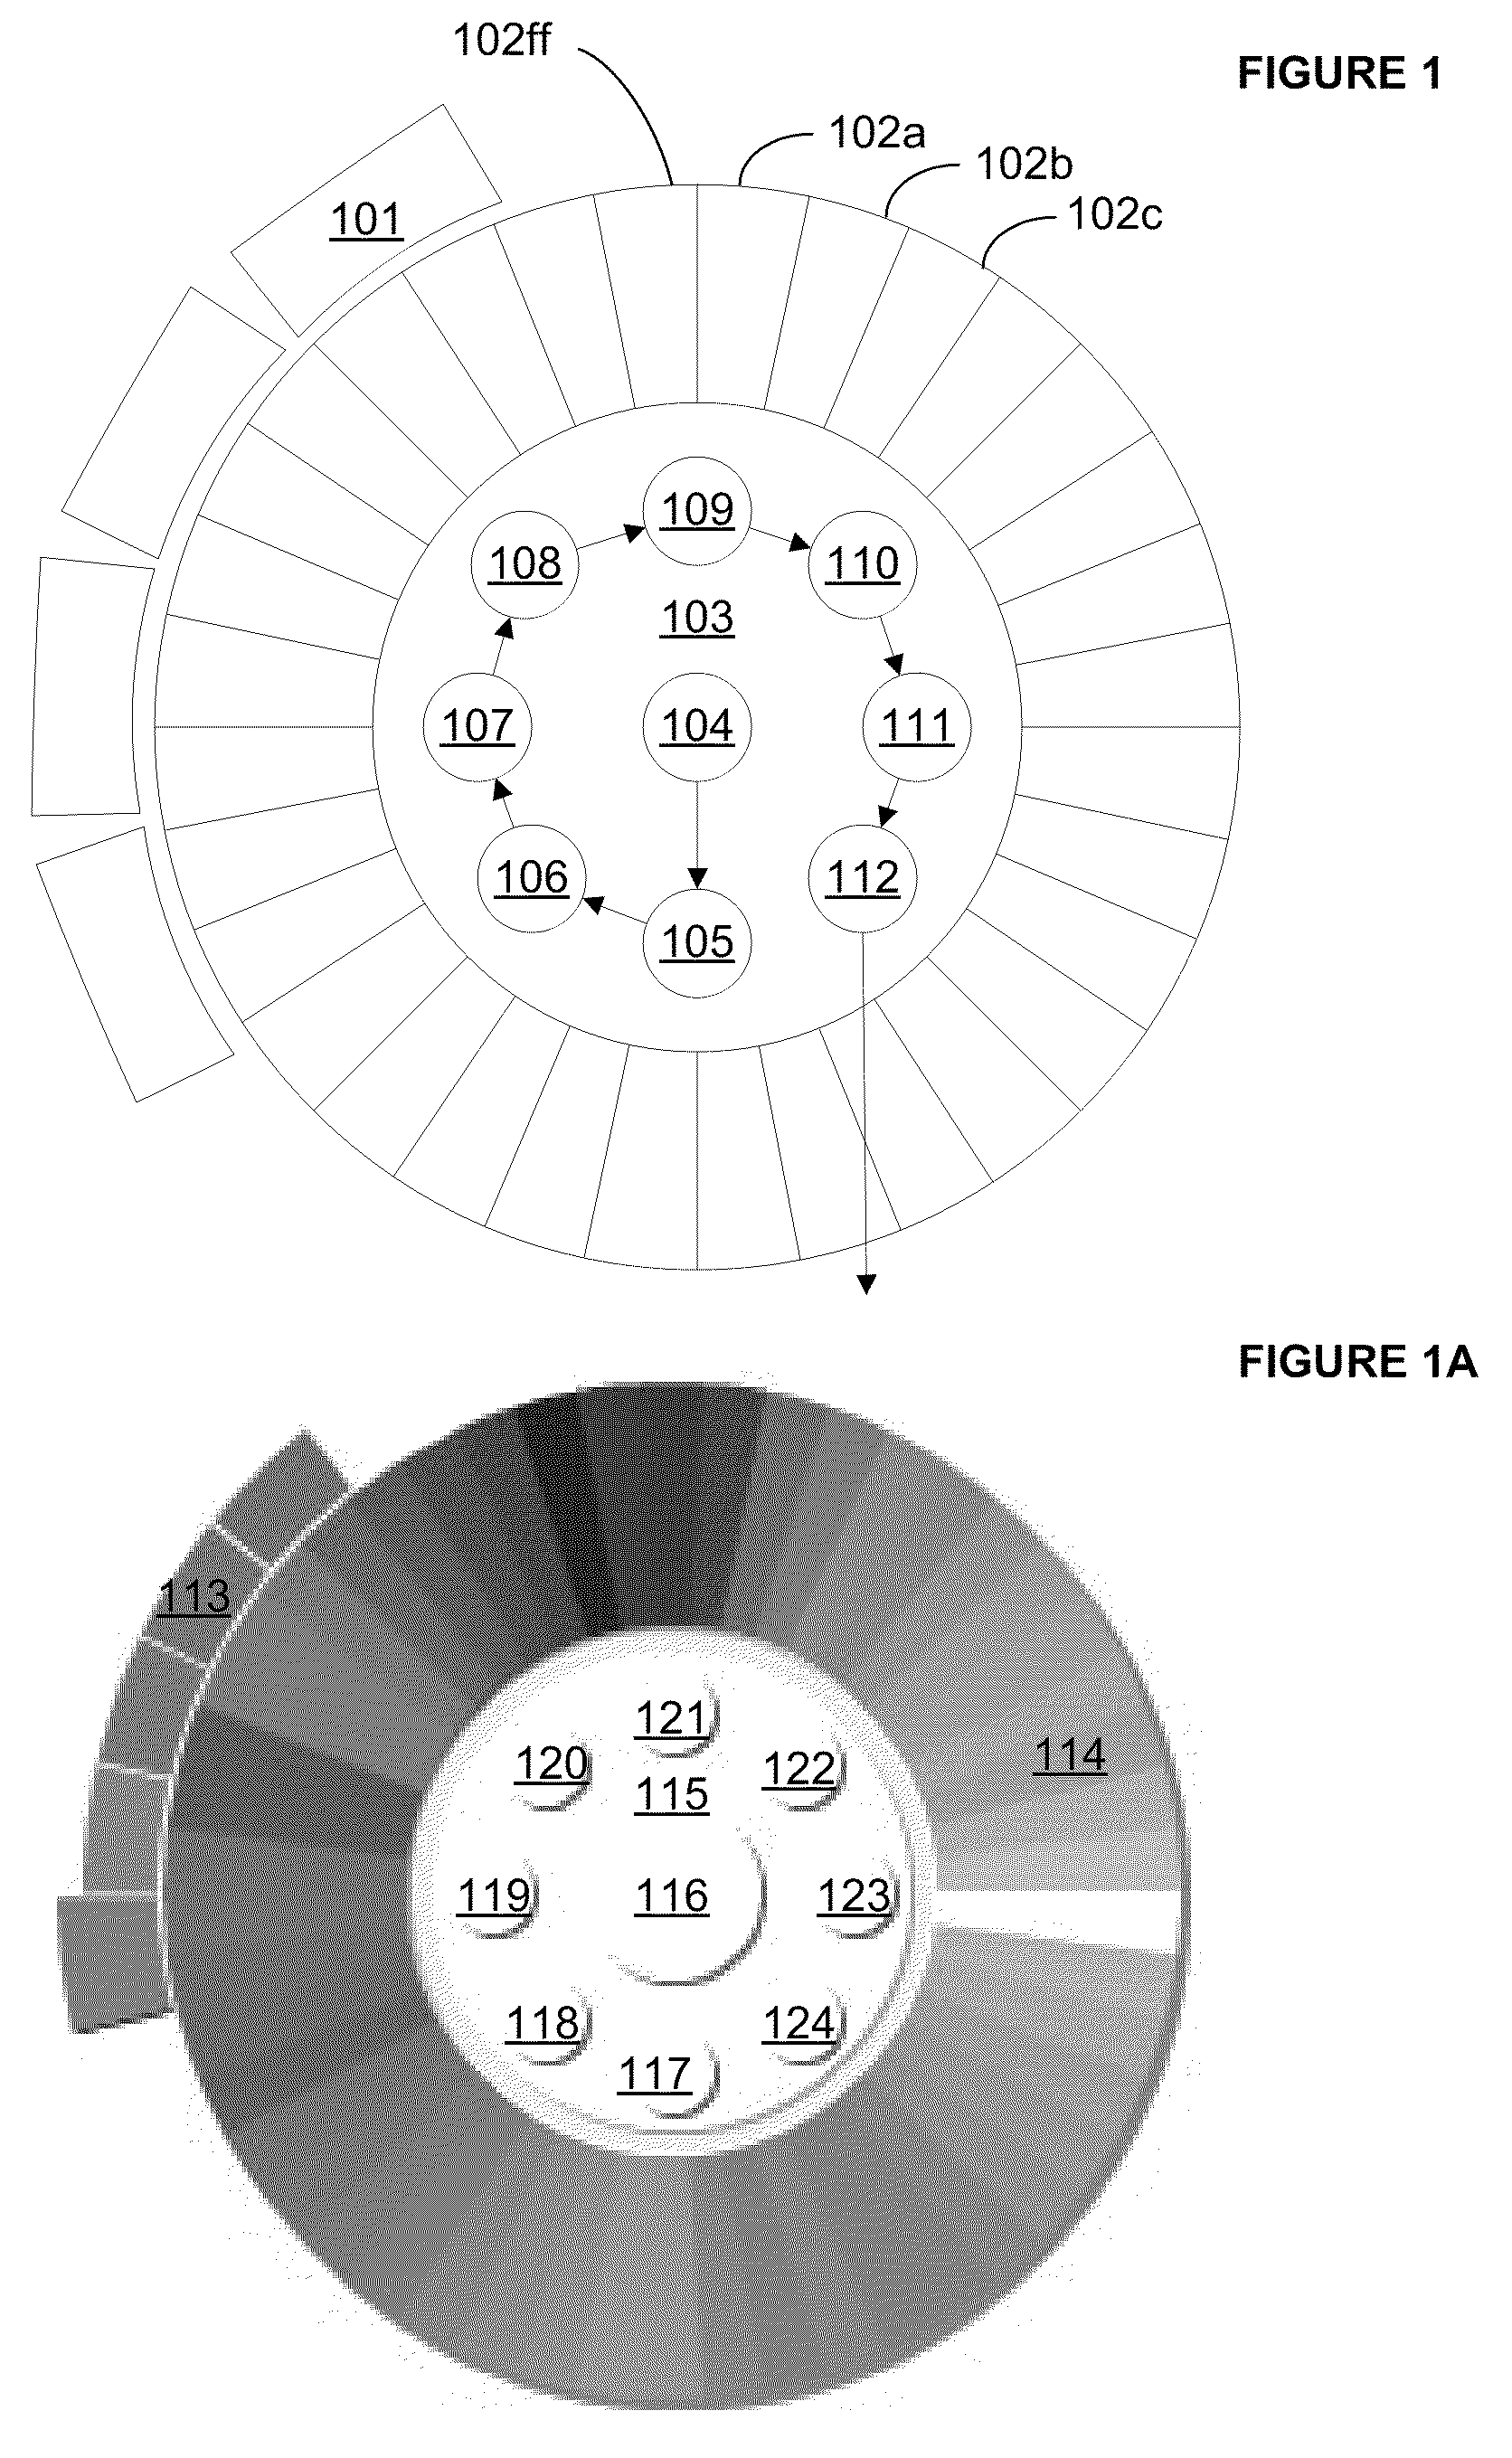 Graphical user interface for selection of options from option groups and methods relating to same